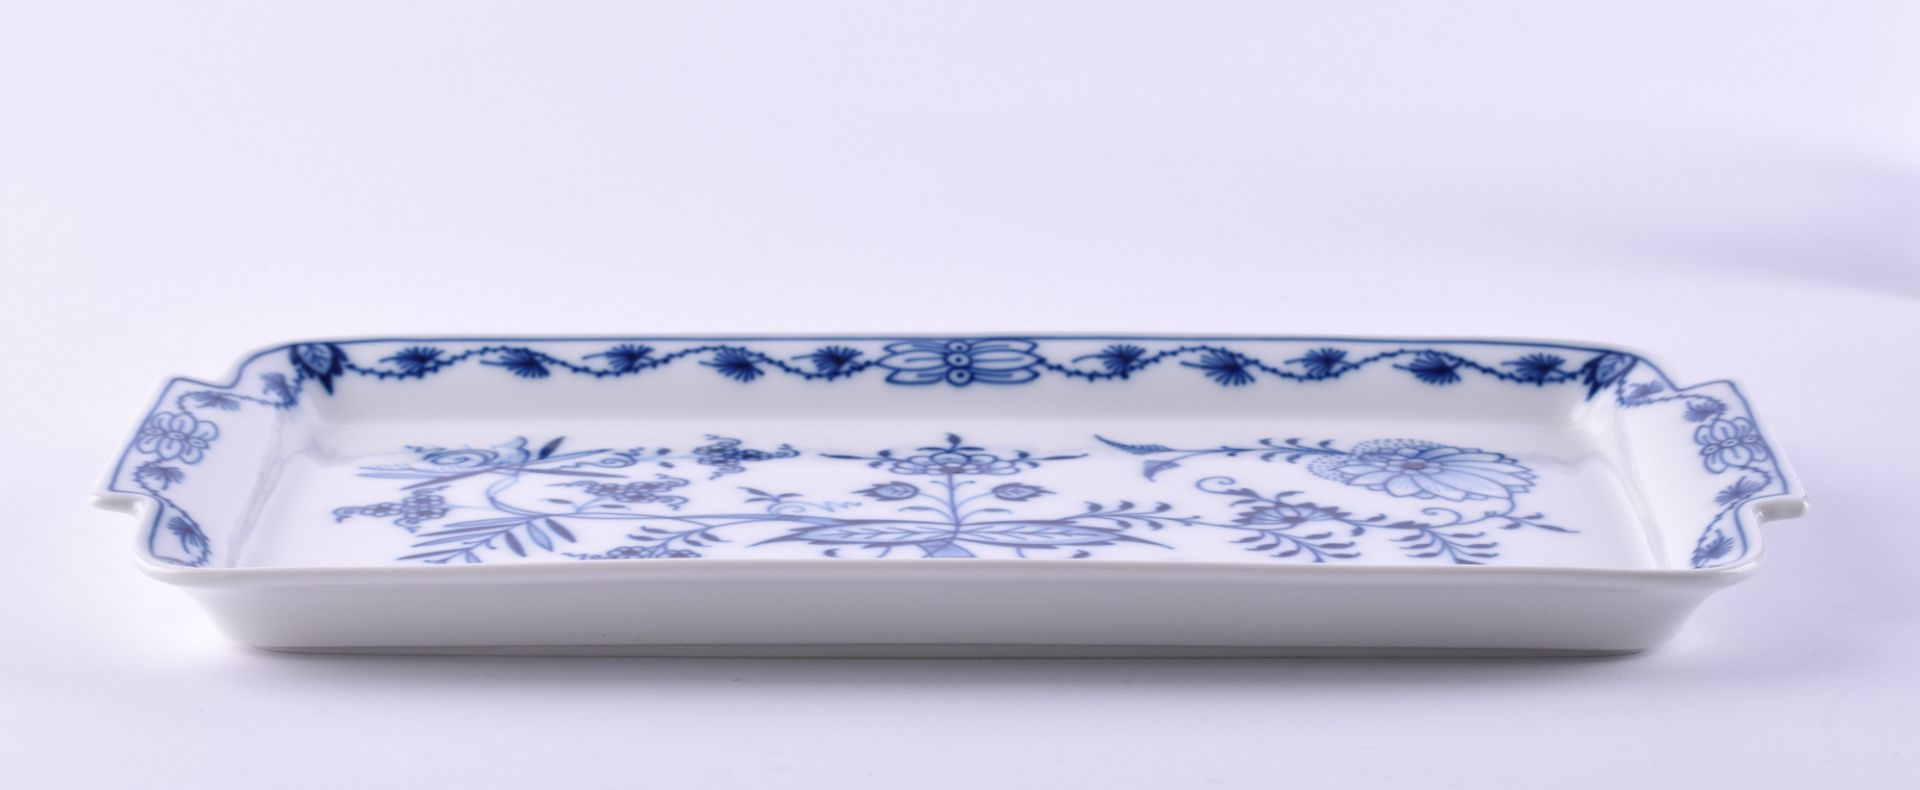  cake plate Meissen - Image 3 of 4